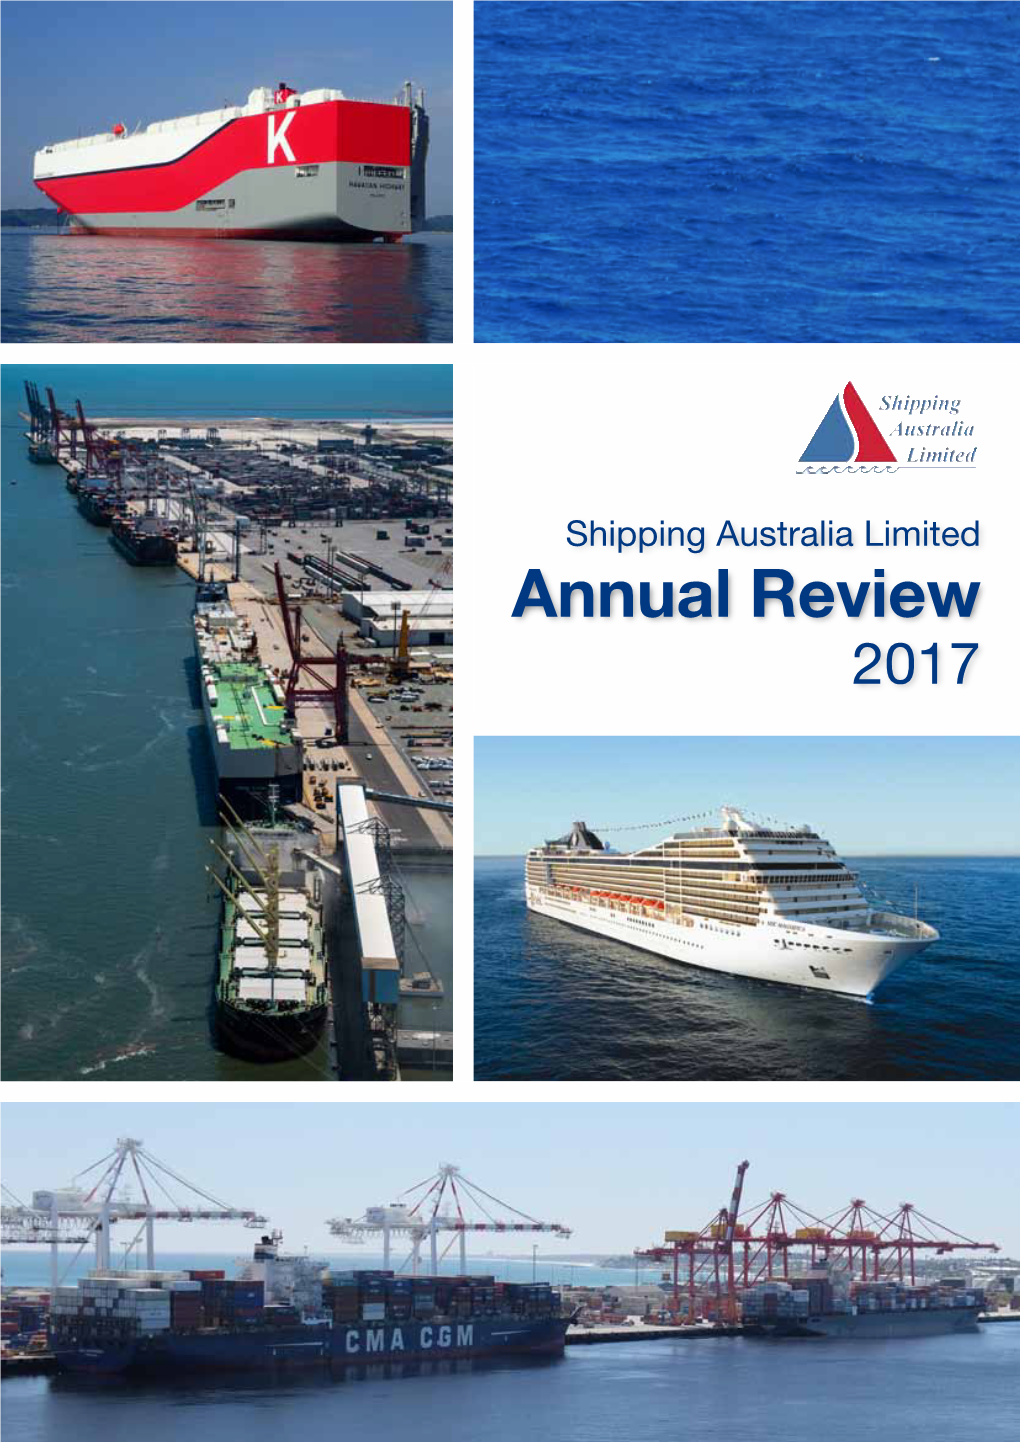 Annual Review 2017 More Than 100 Years of Ports and Logistics Experience